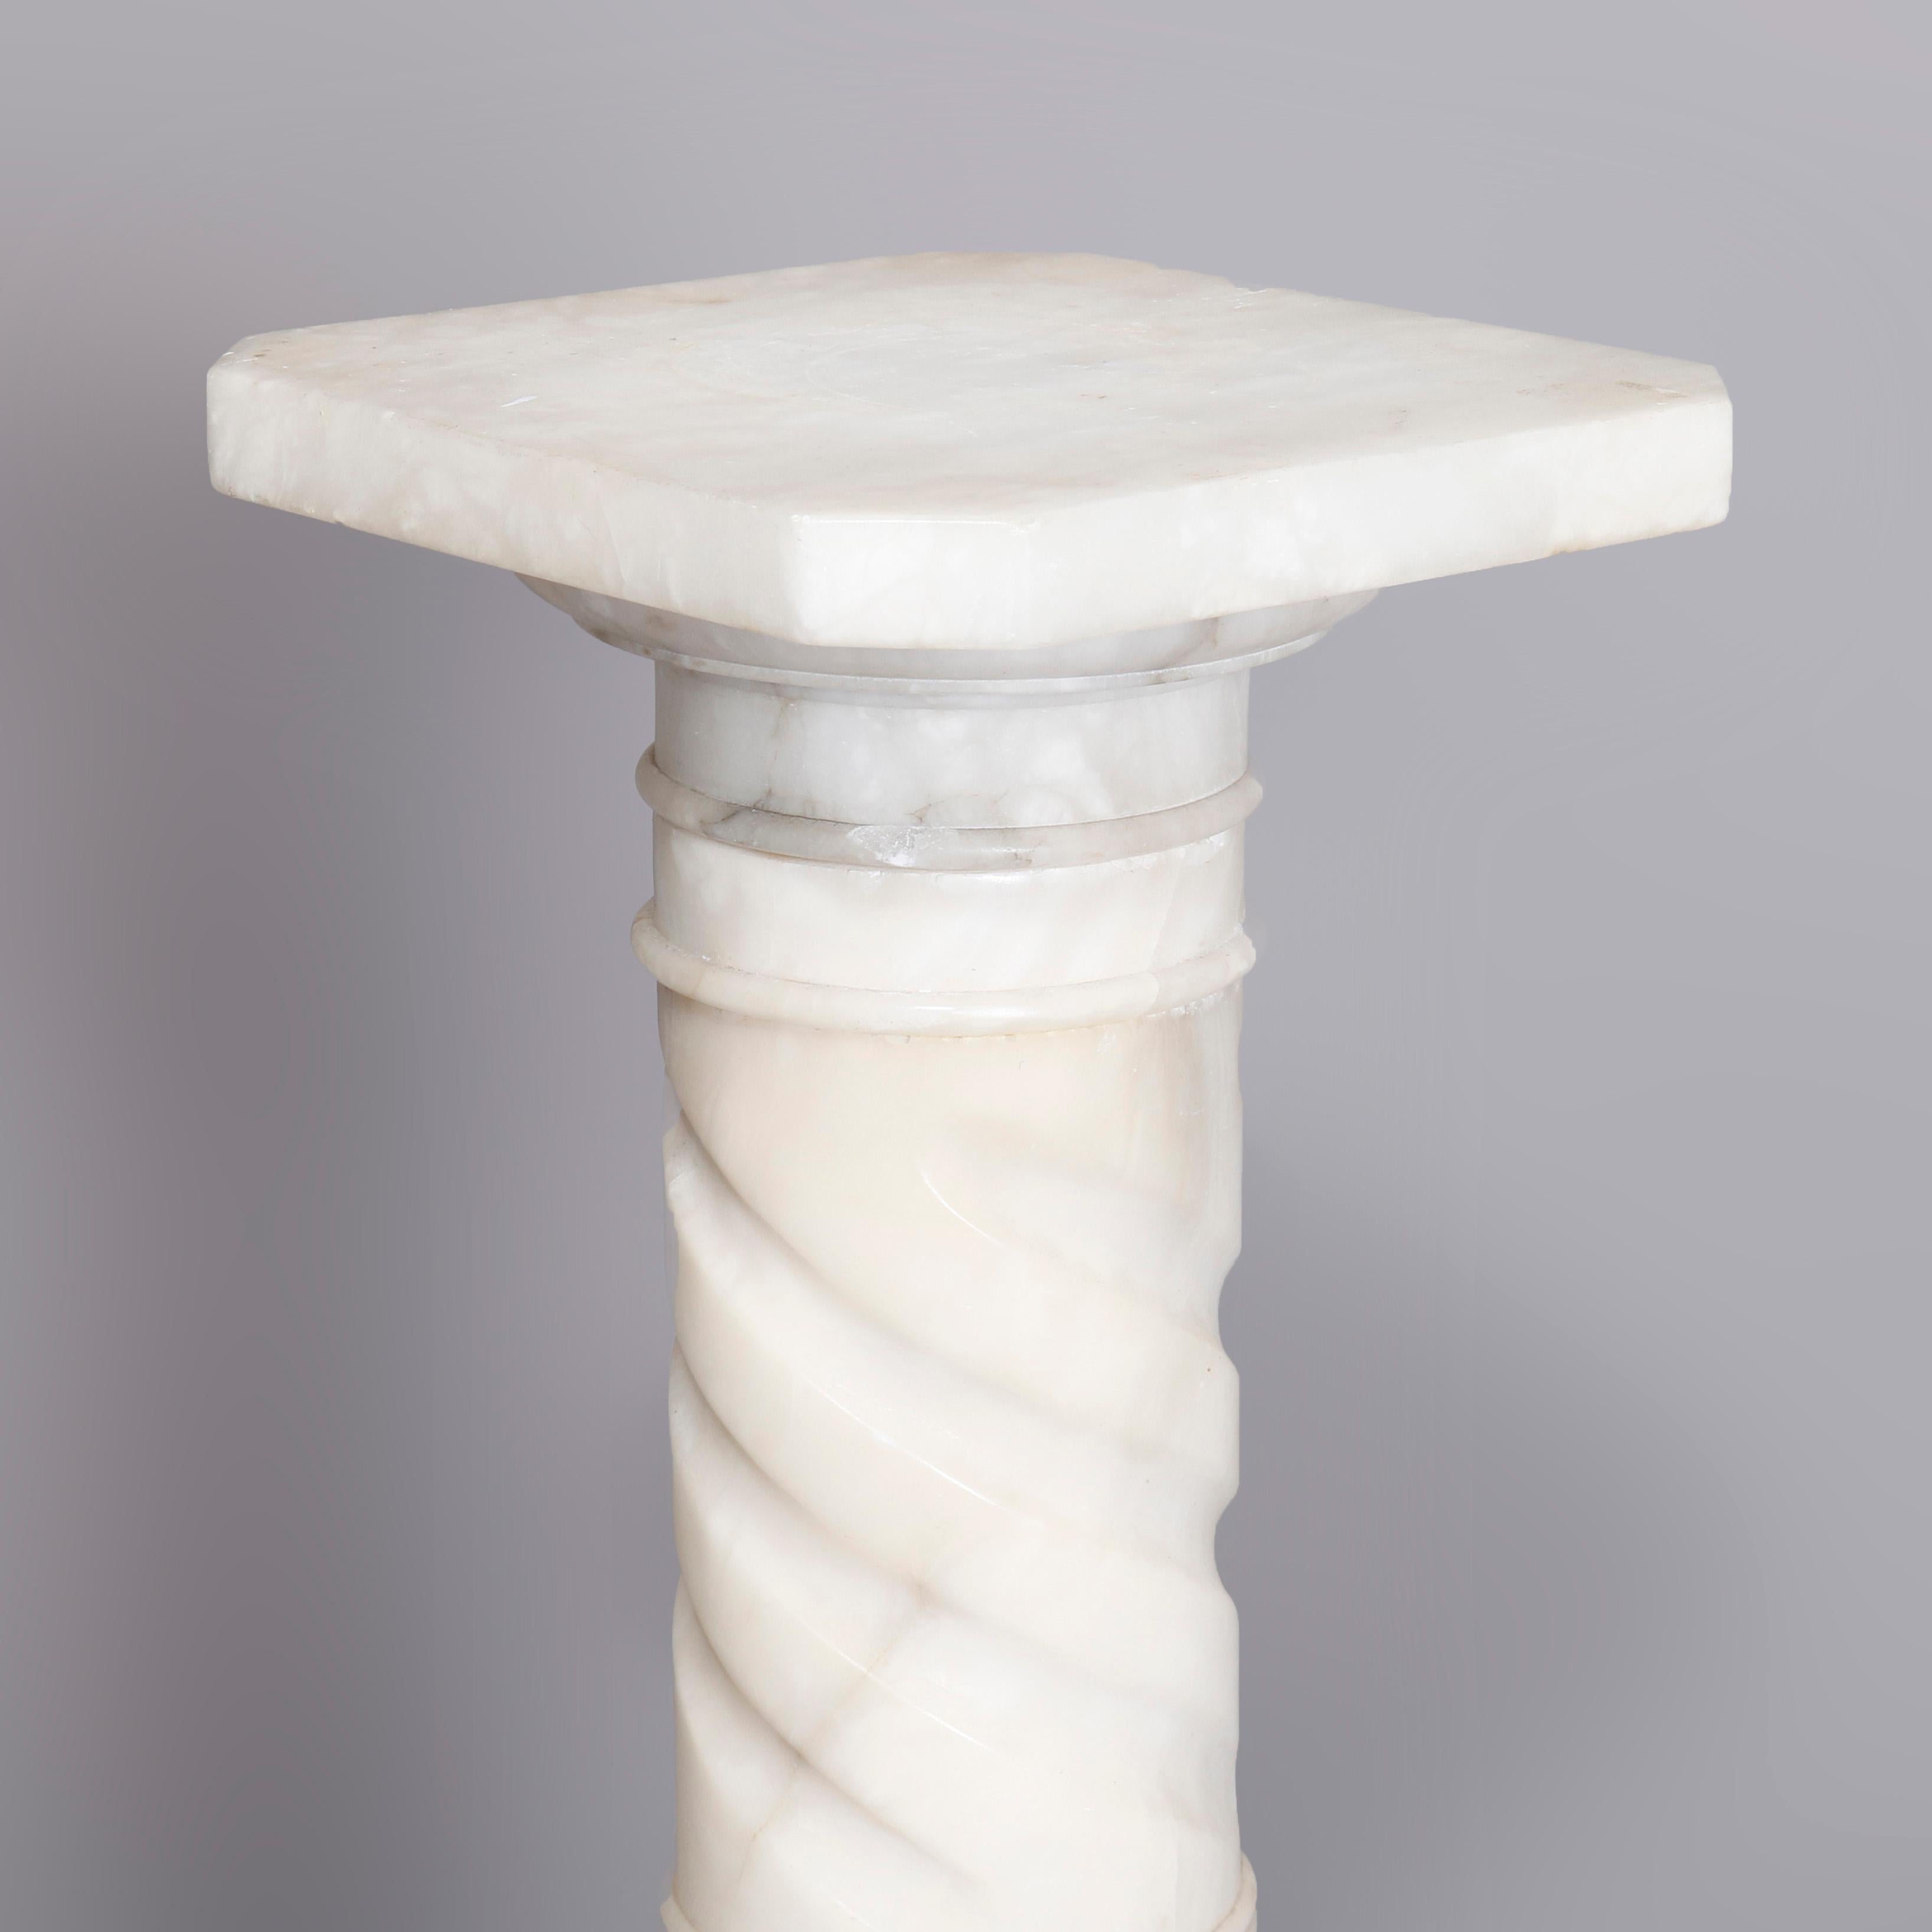 An antique carved Italian marble sculpture display pedestal offers Doric column form with clipped corner display surmounting twisted rope form column seated on stepped base, circa 1900.

***DELIVERY NOTICE – Due to COVID-19 we are employing